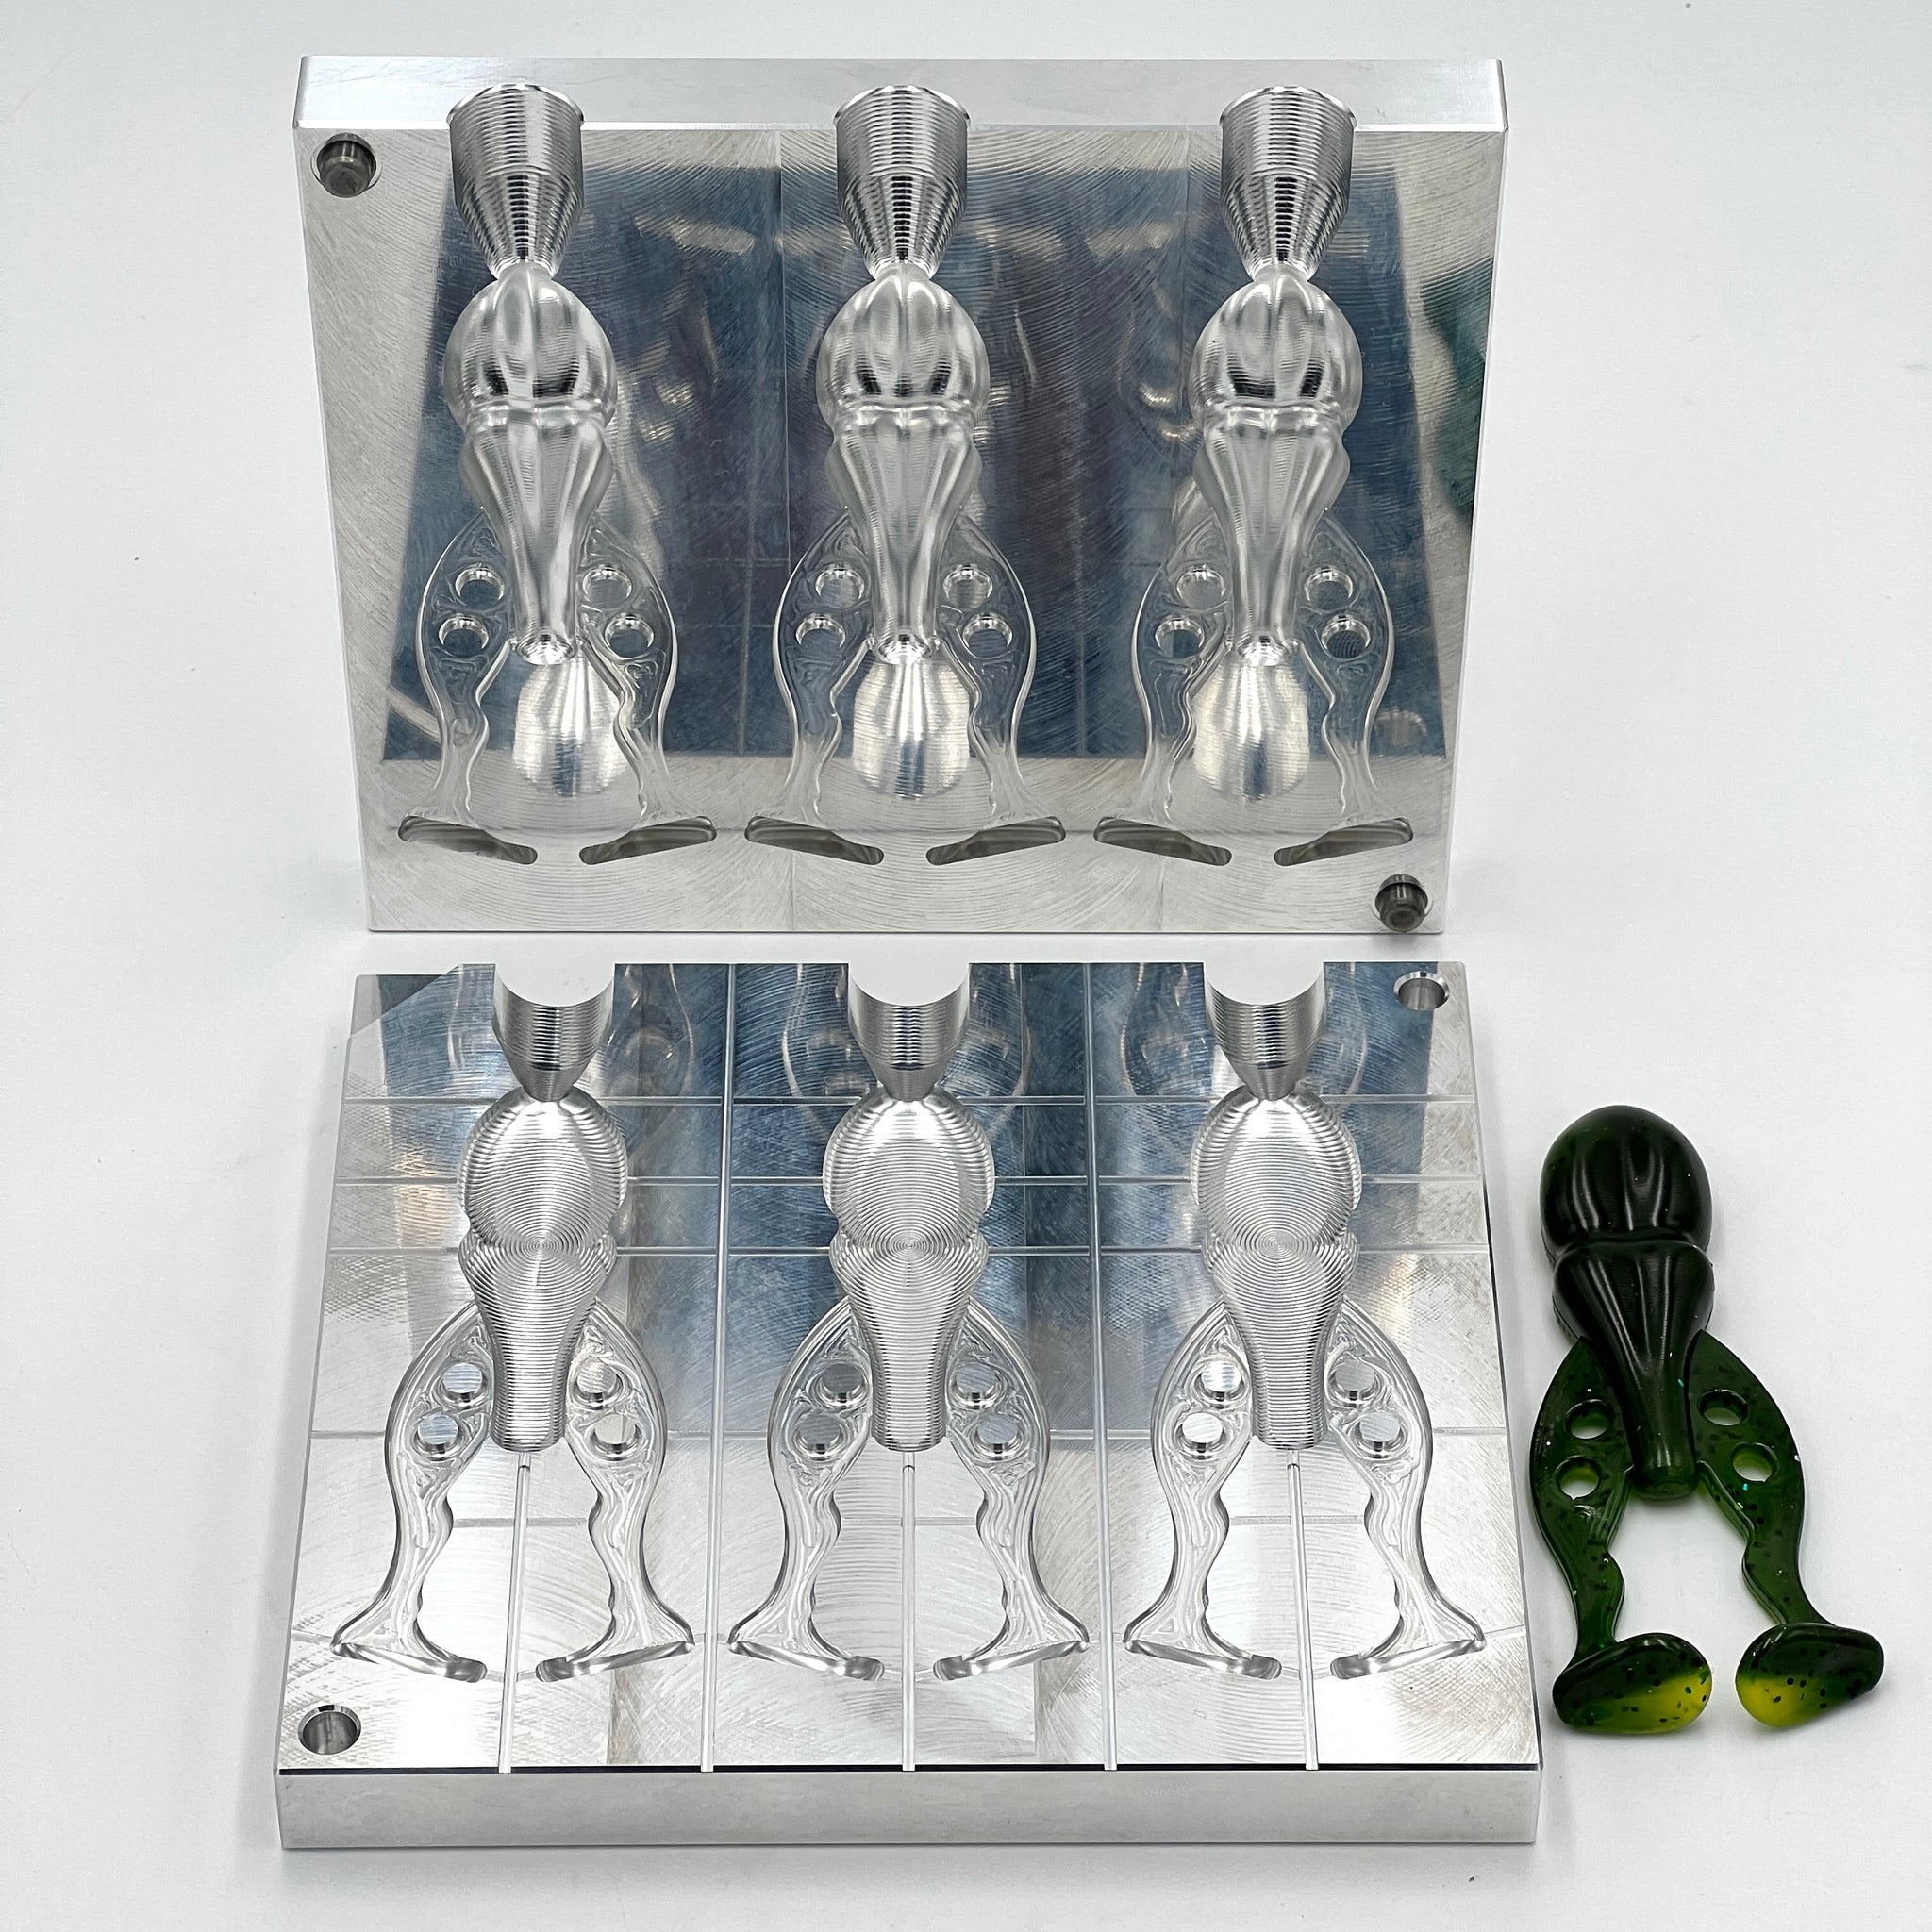 4.6 Inch Freakin Frog Hand Injection Mold – Epic Bait Molds